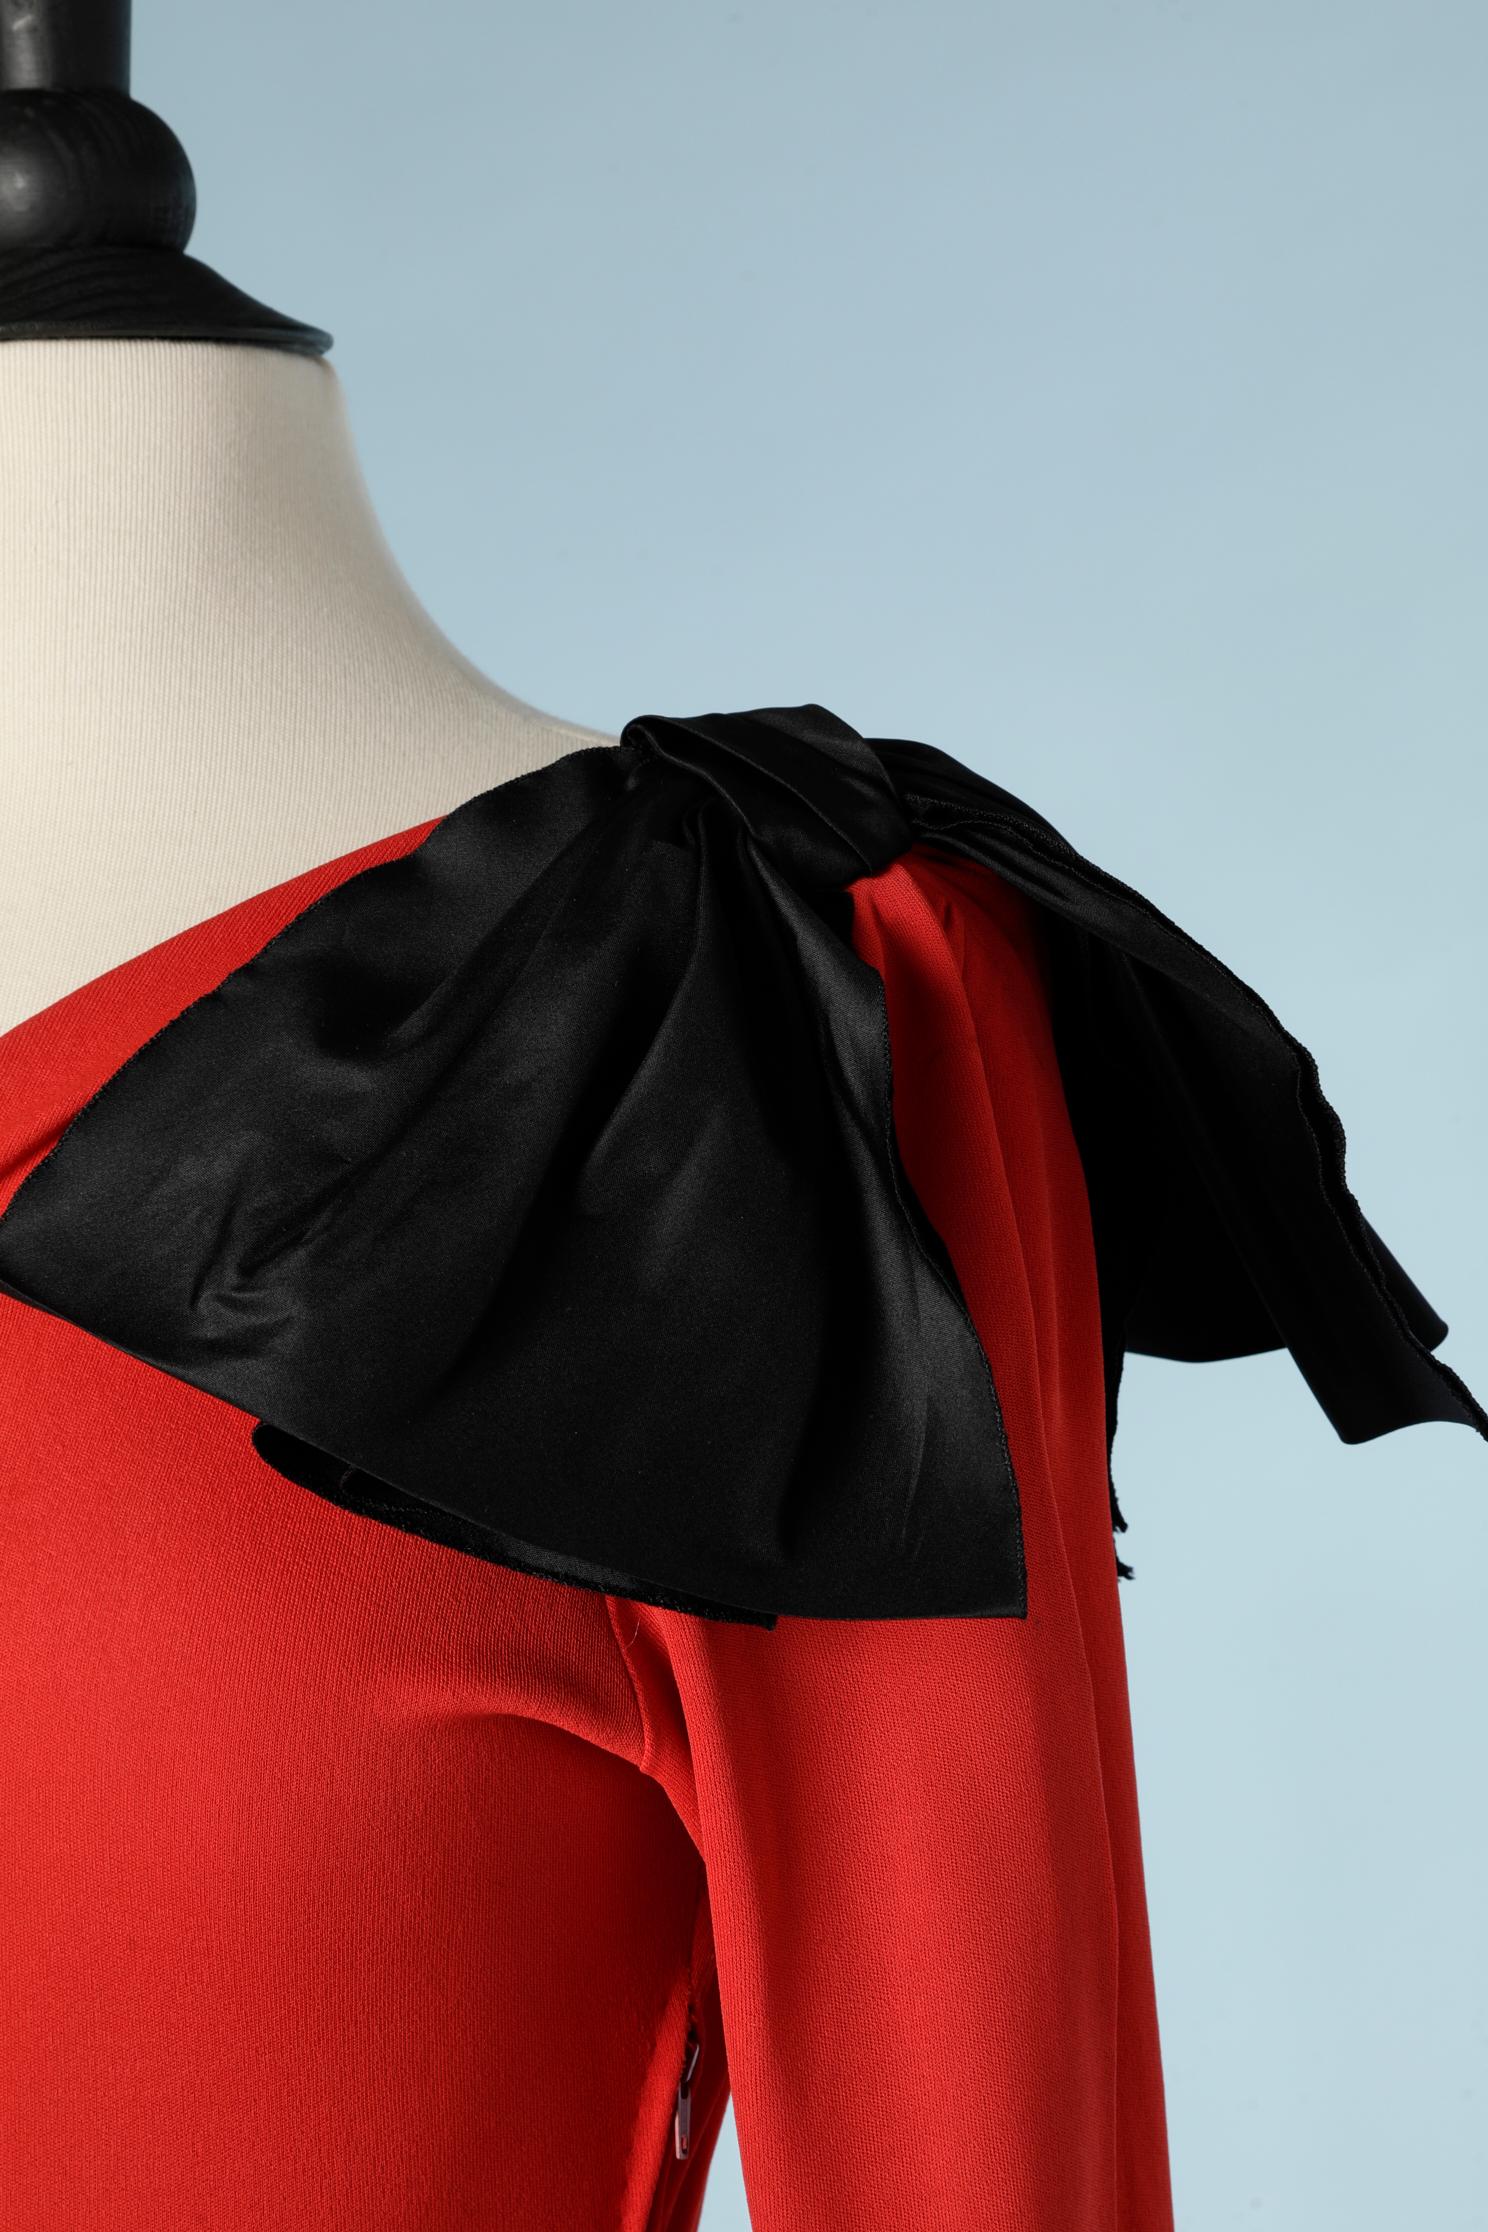 Long red and black asymmetrical evening dress. The top part is in red silk jersey and the skirt in black taffetas. All the  bows in taffetas as well. Ruffles skirt. Rayon lining inside the skirt; 
SIZE 38 ( M) 